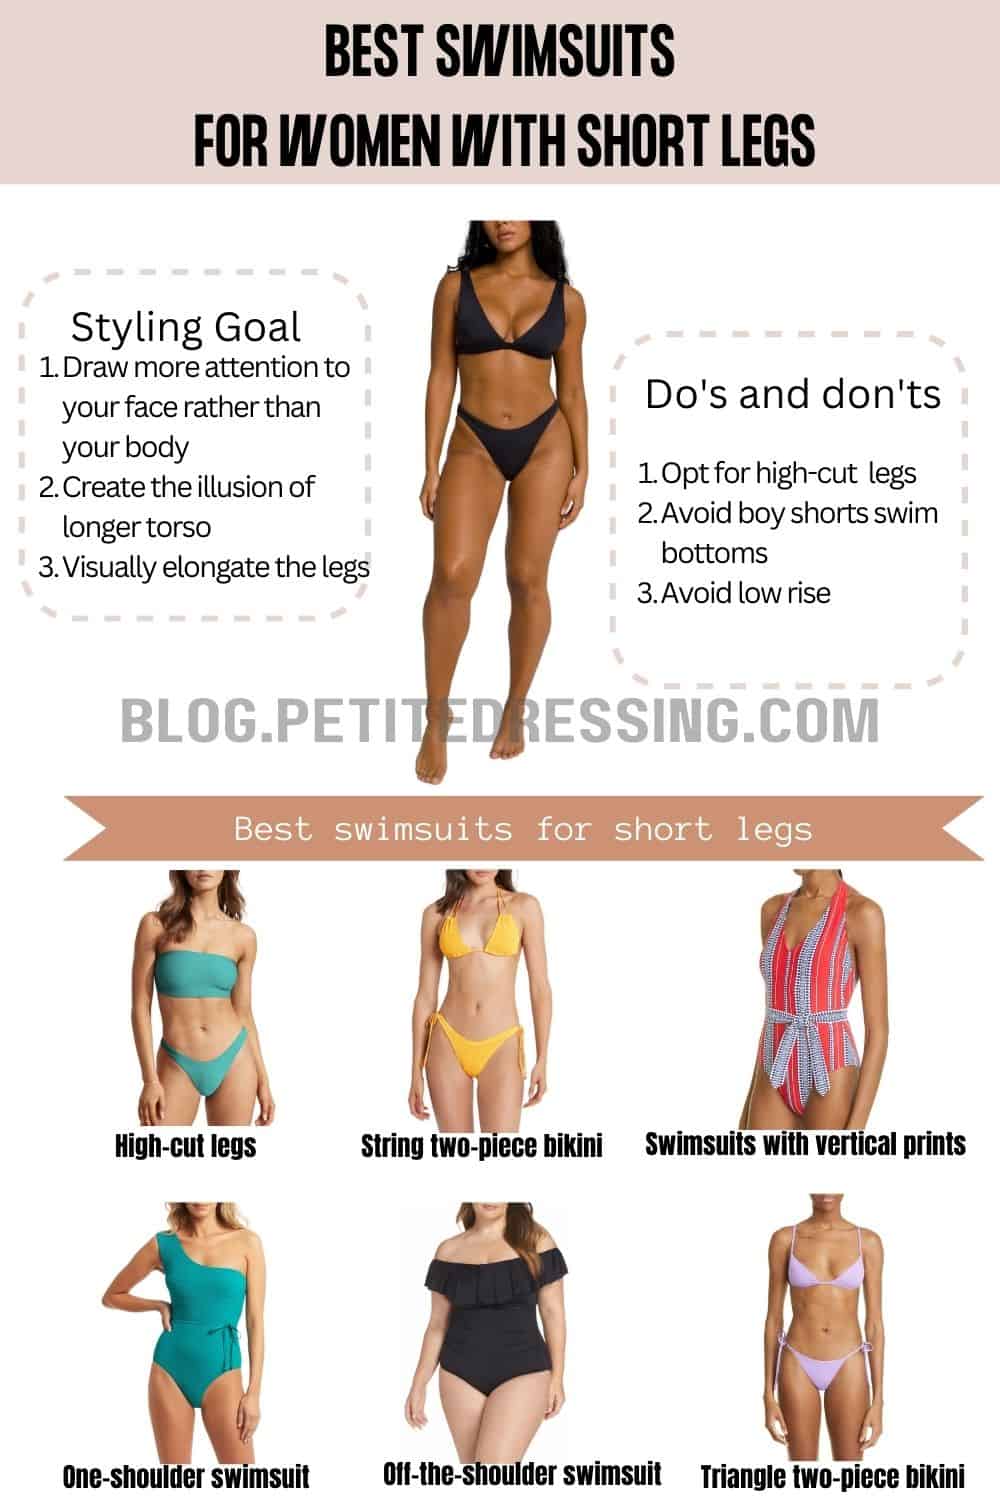 Swimsuit Guide for Women with Legs